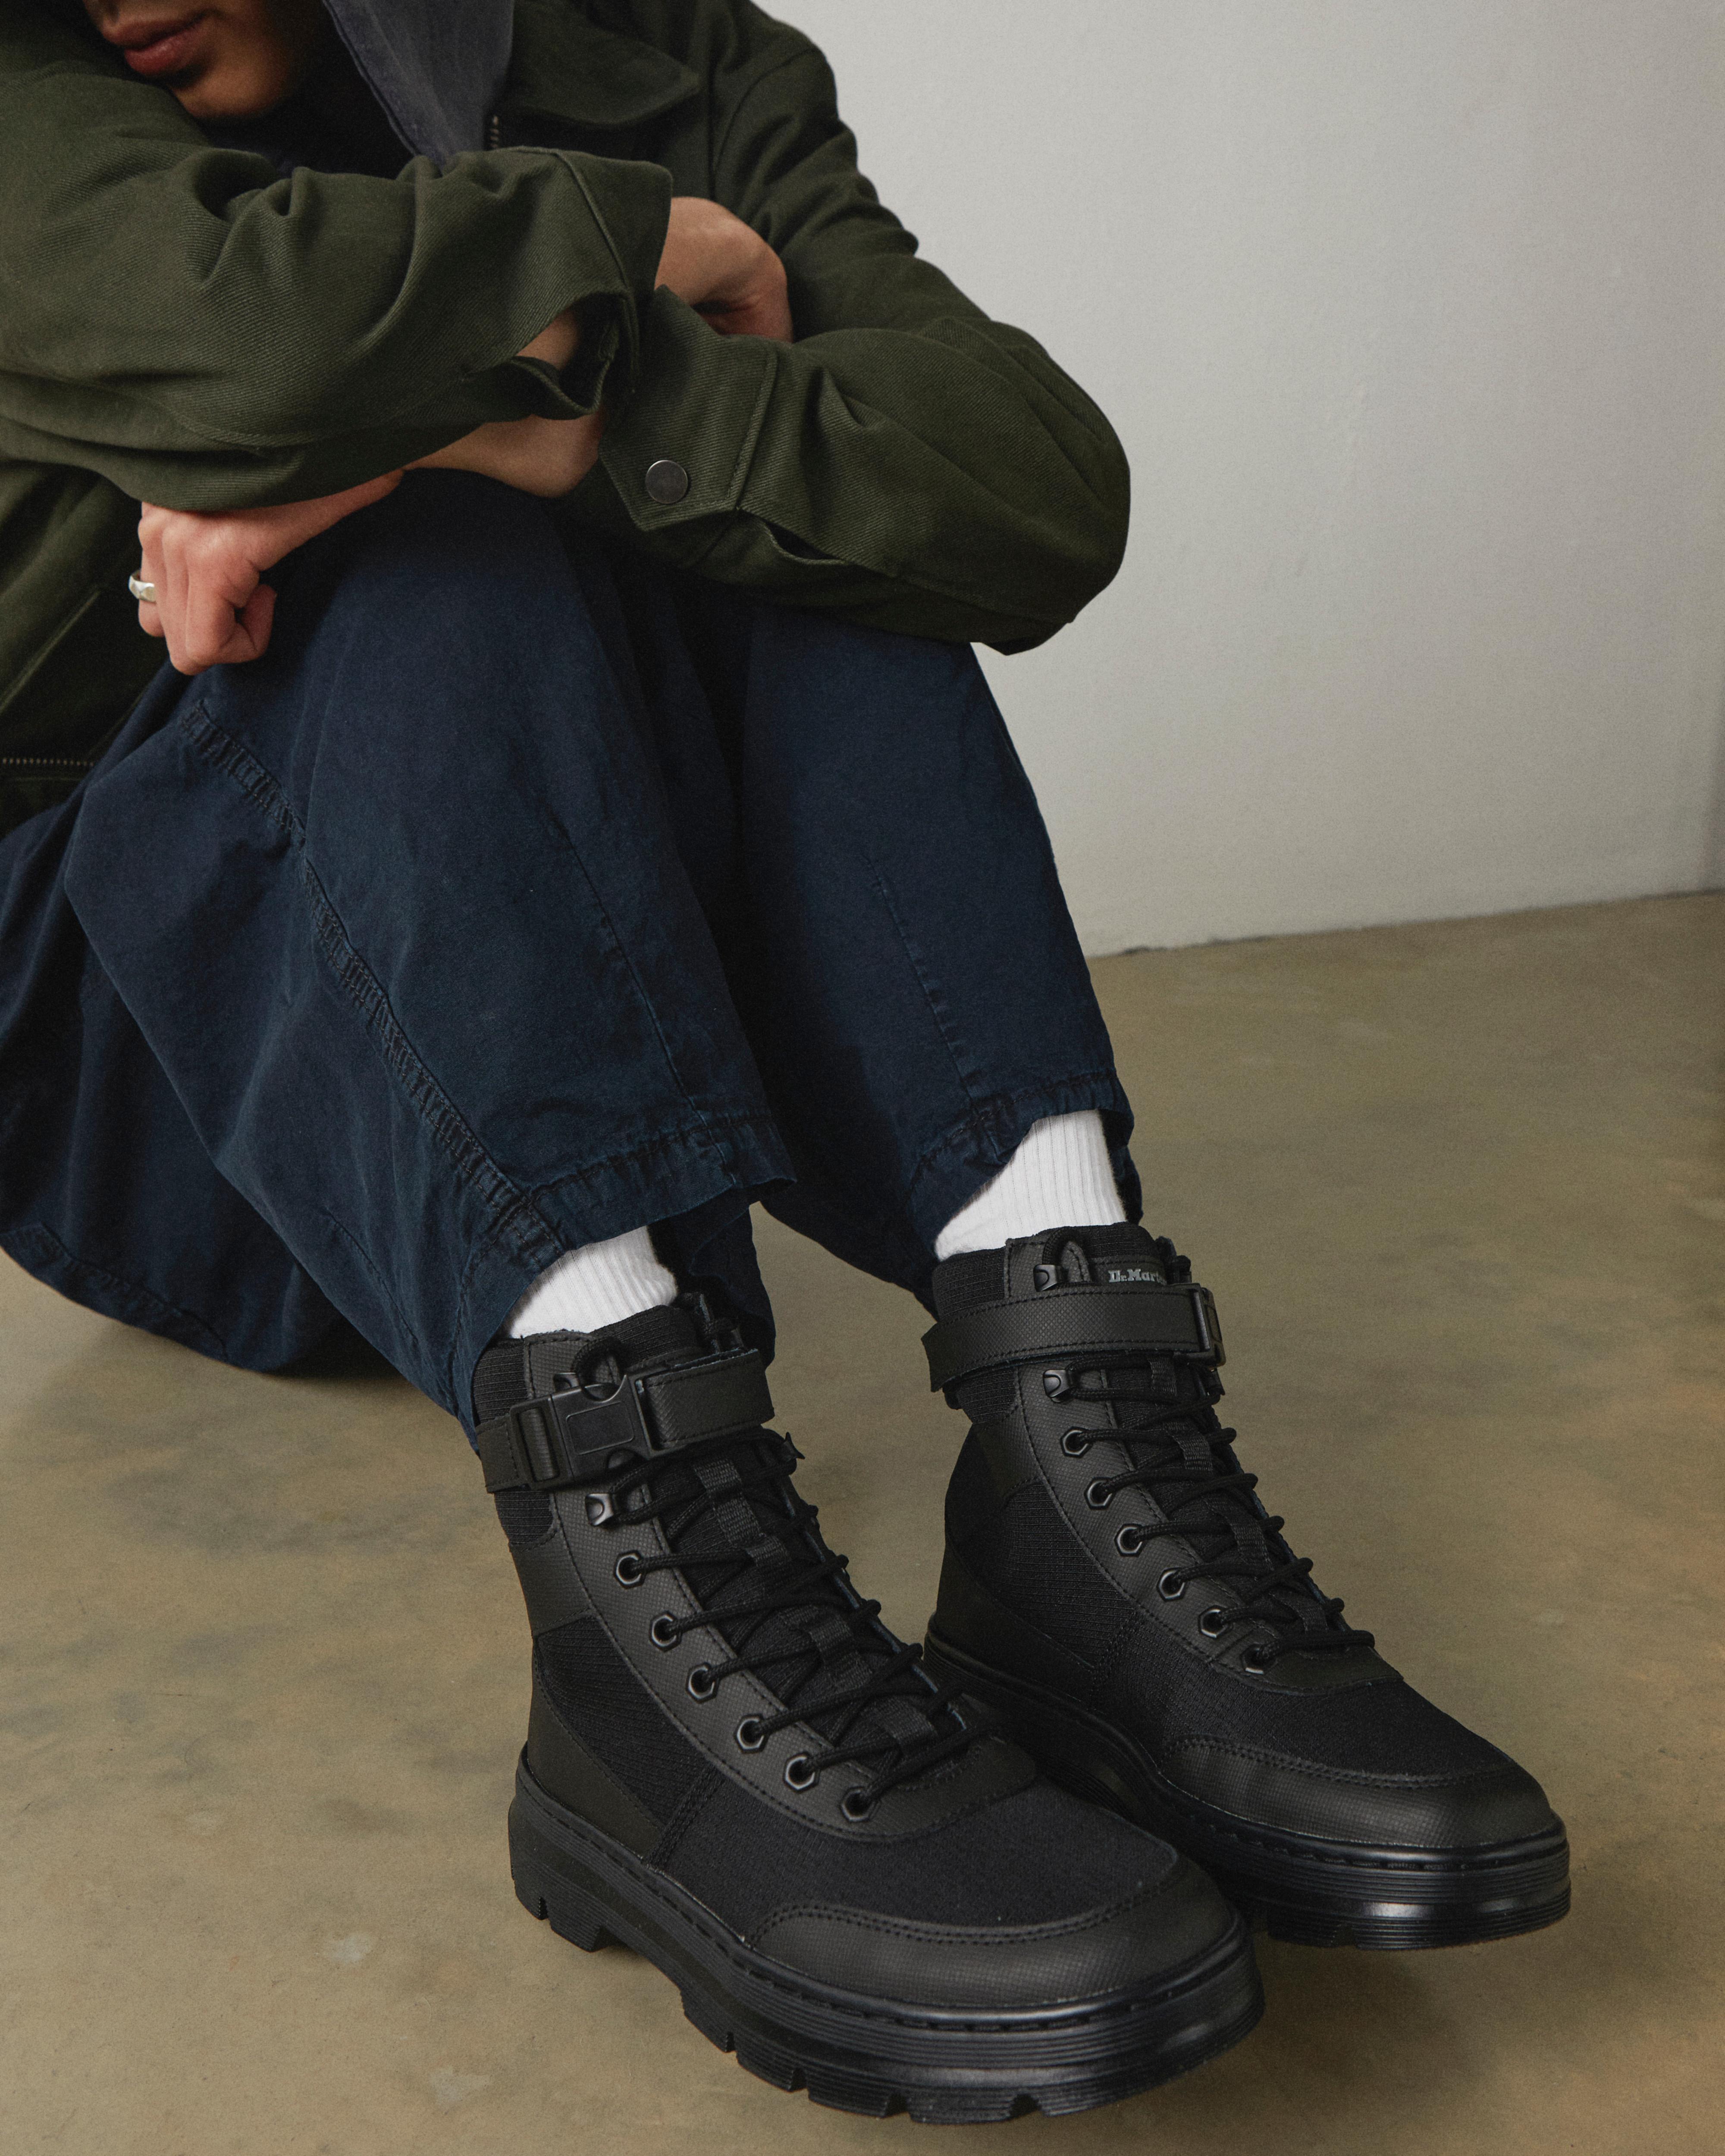 Combs Tech Poly Utility Boots in Black | Dr. Martens